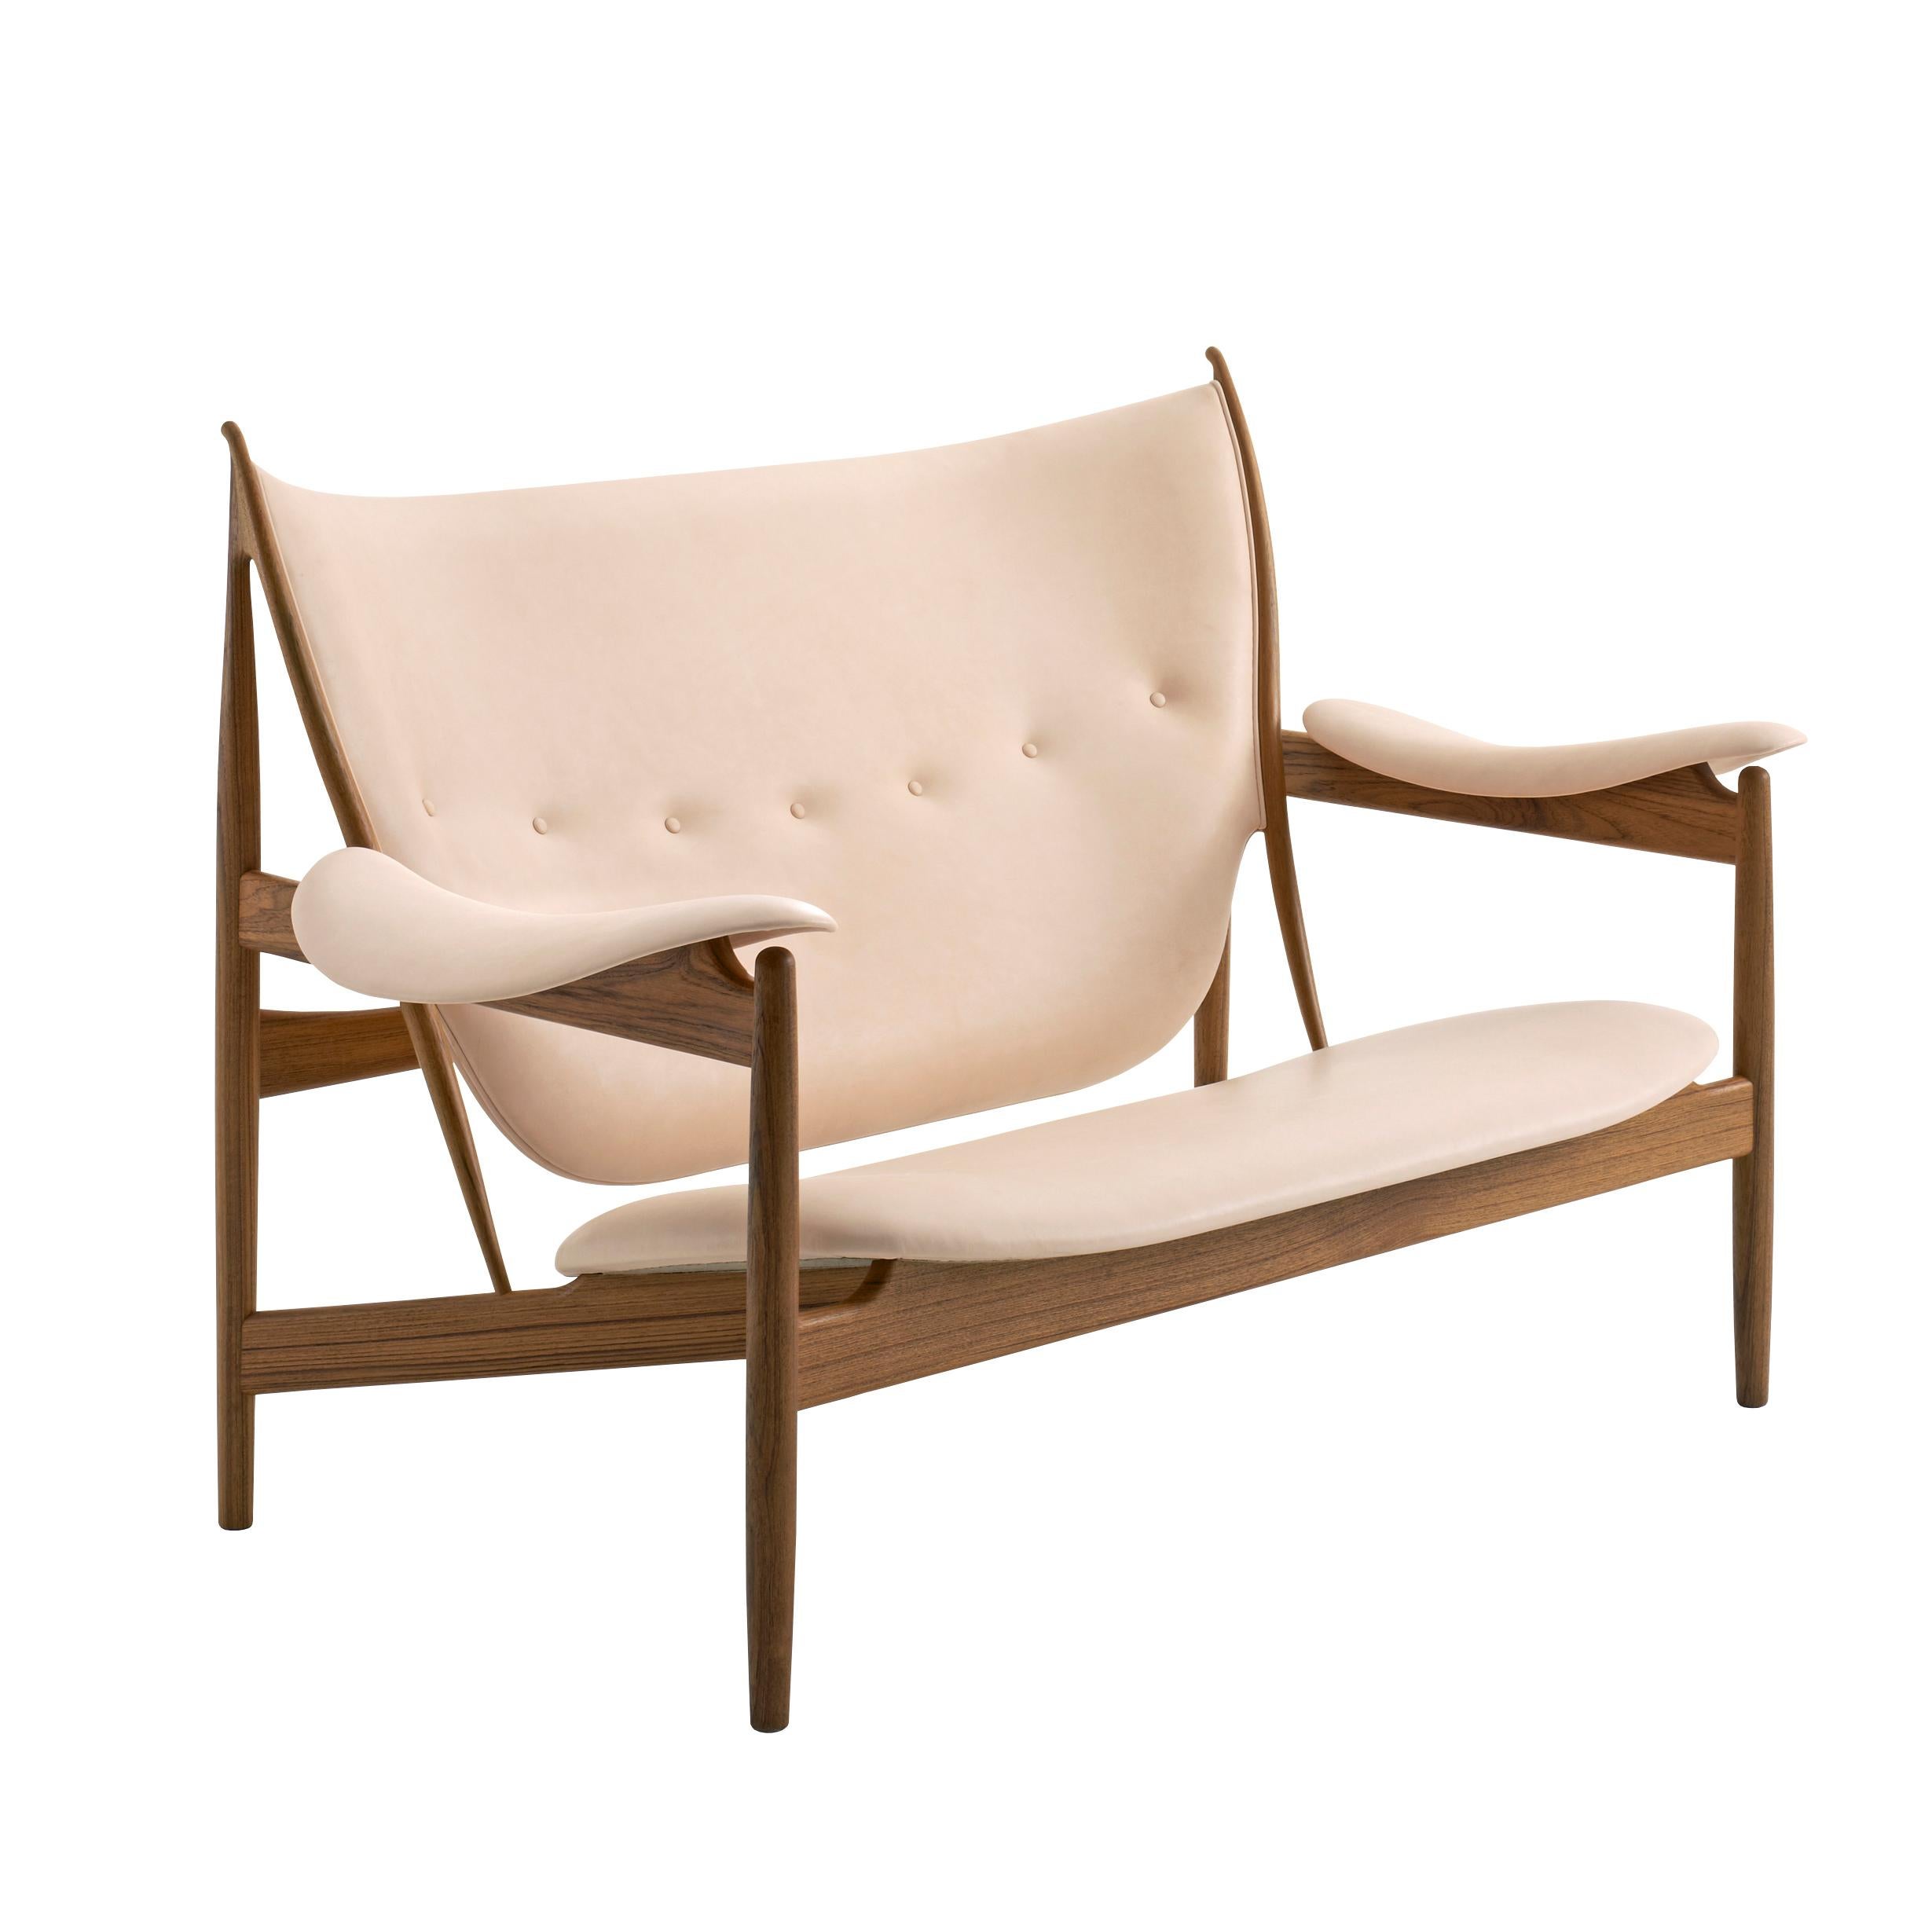 Sofa designed by Finn Juhl in 1949, relaunched in 2013.
Manufactured by House of Finn Juhl in Denmark.

Alongside the impressive Chieftain chair, Finn Juhl and cabinetmaker Niels Vodder also introduced the Chieftain Sofa in 1949.

While the